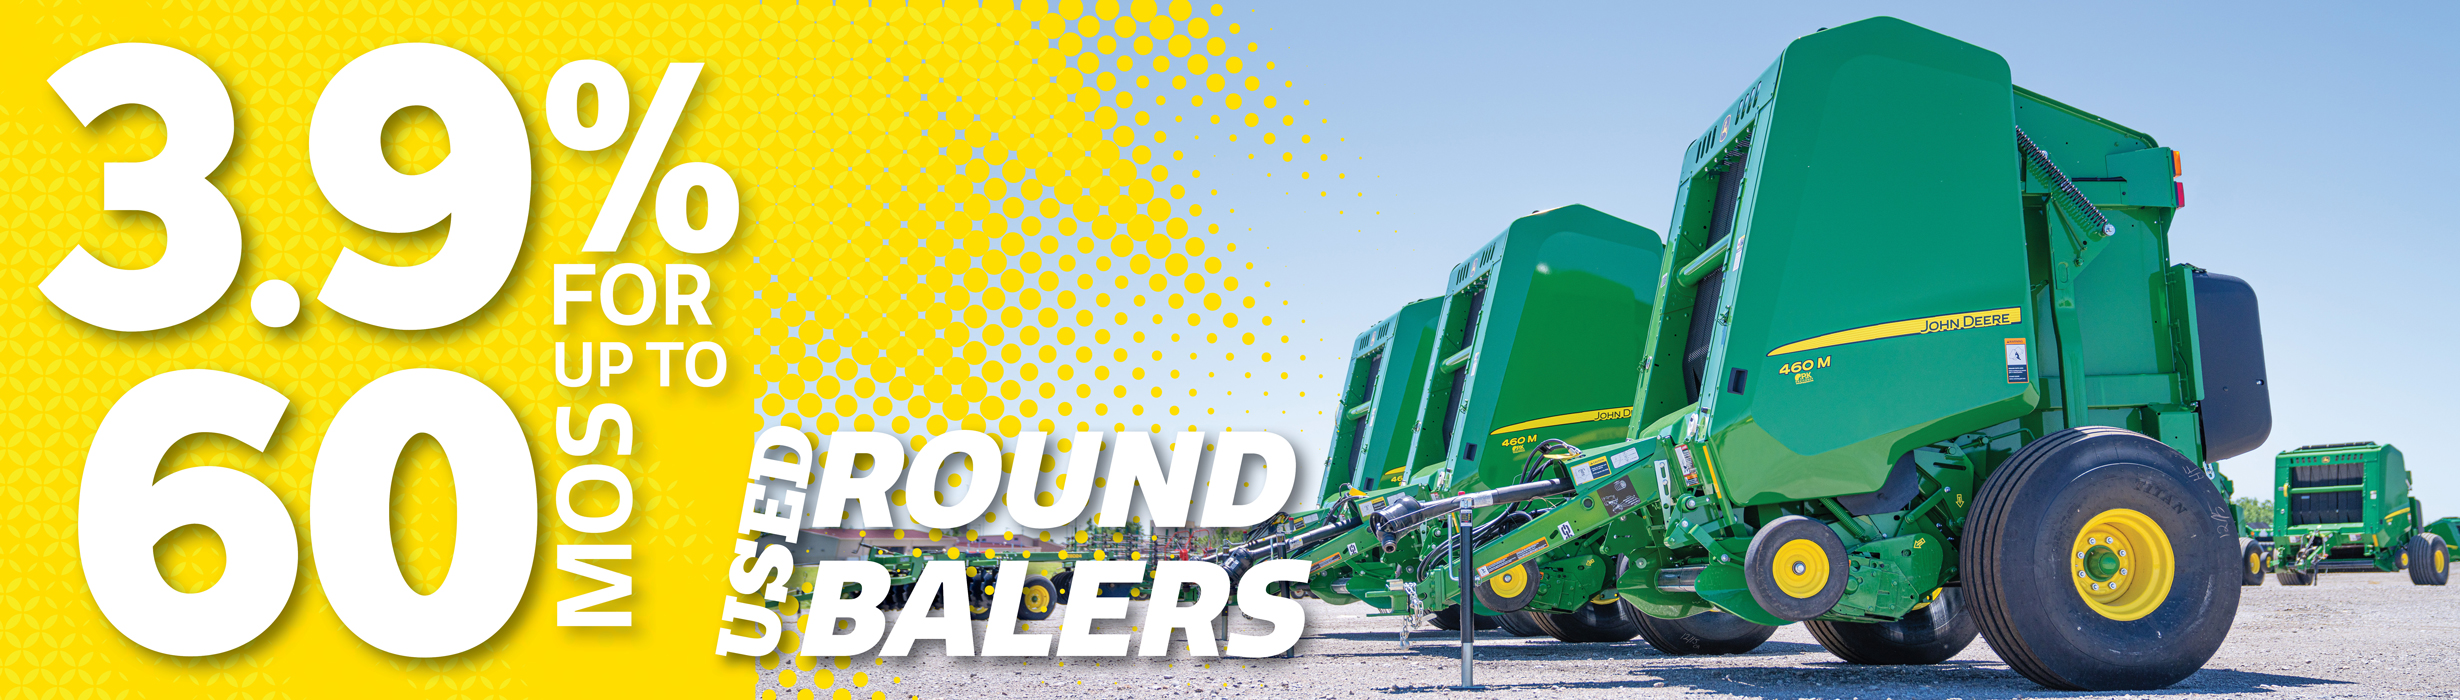 Right now get 3.9% for up to 60 mos on Used Round Balers